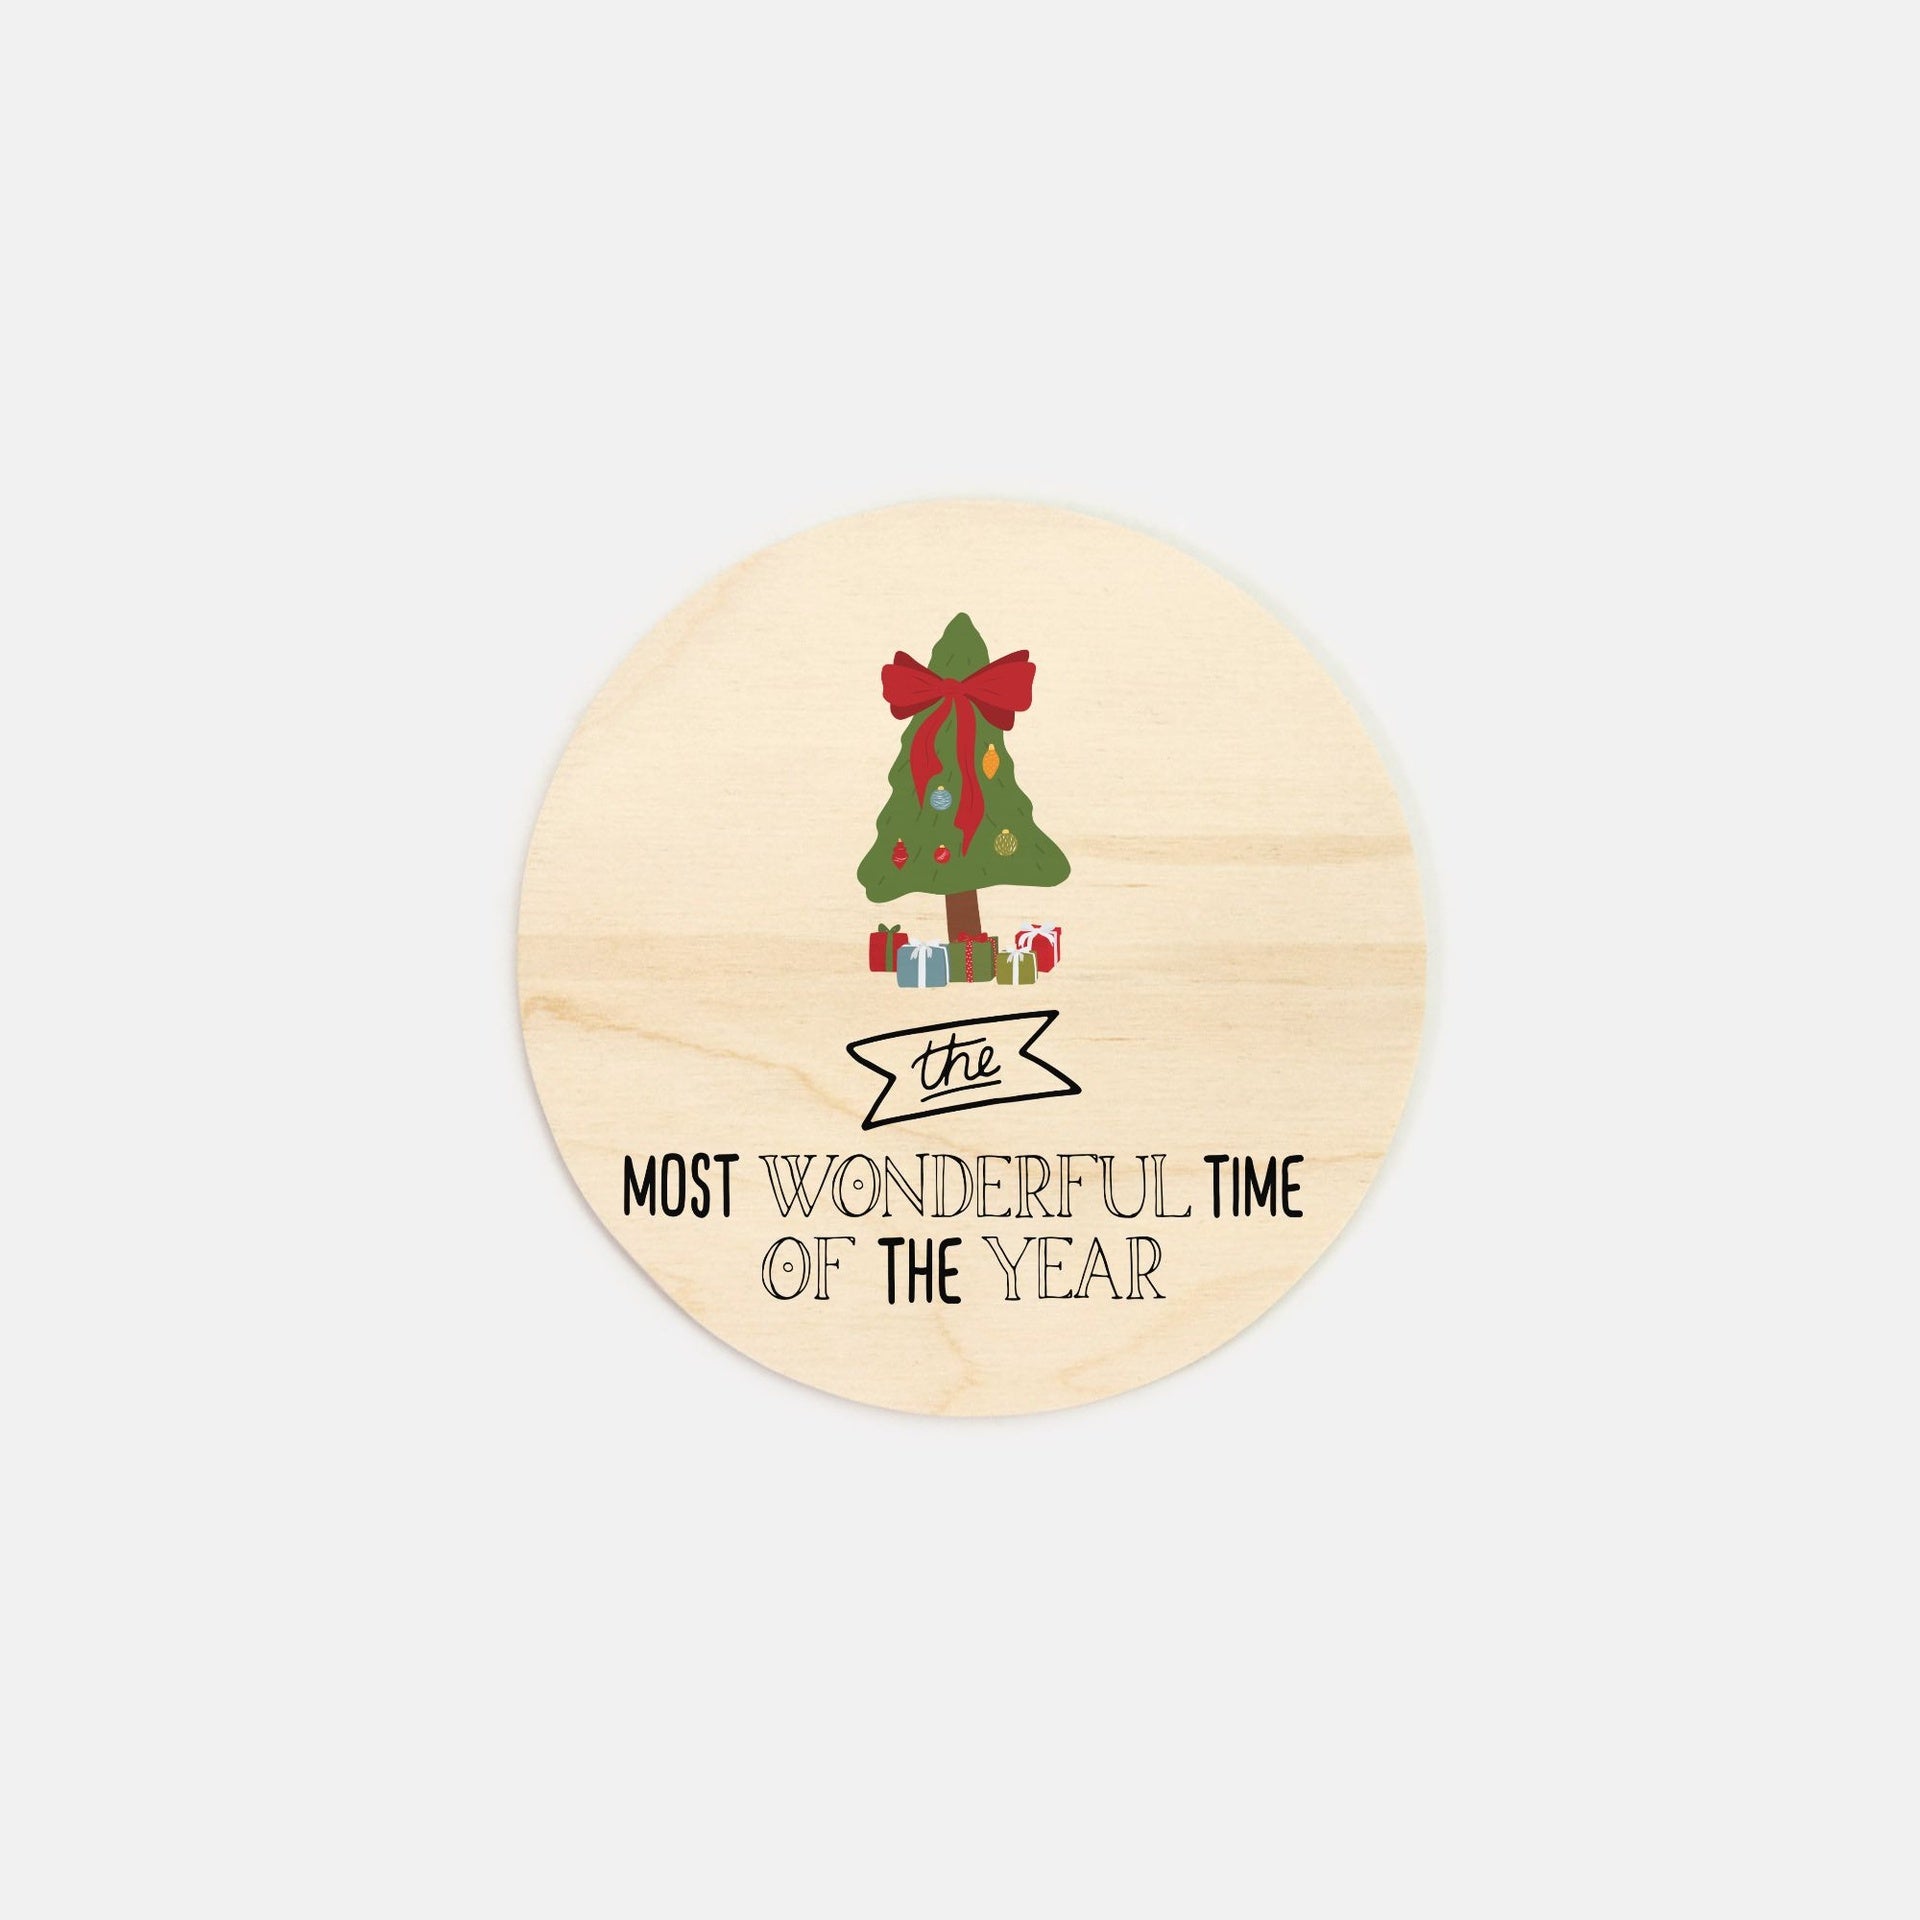 6" Round Wood Sign - Most Wonderful Time